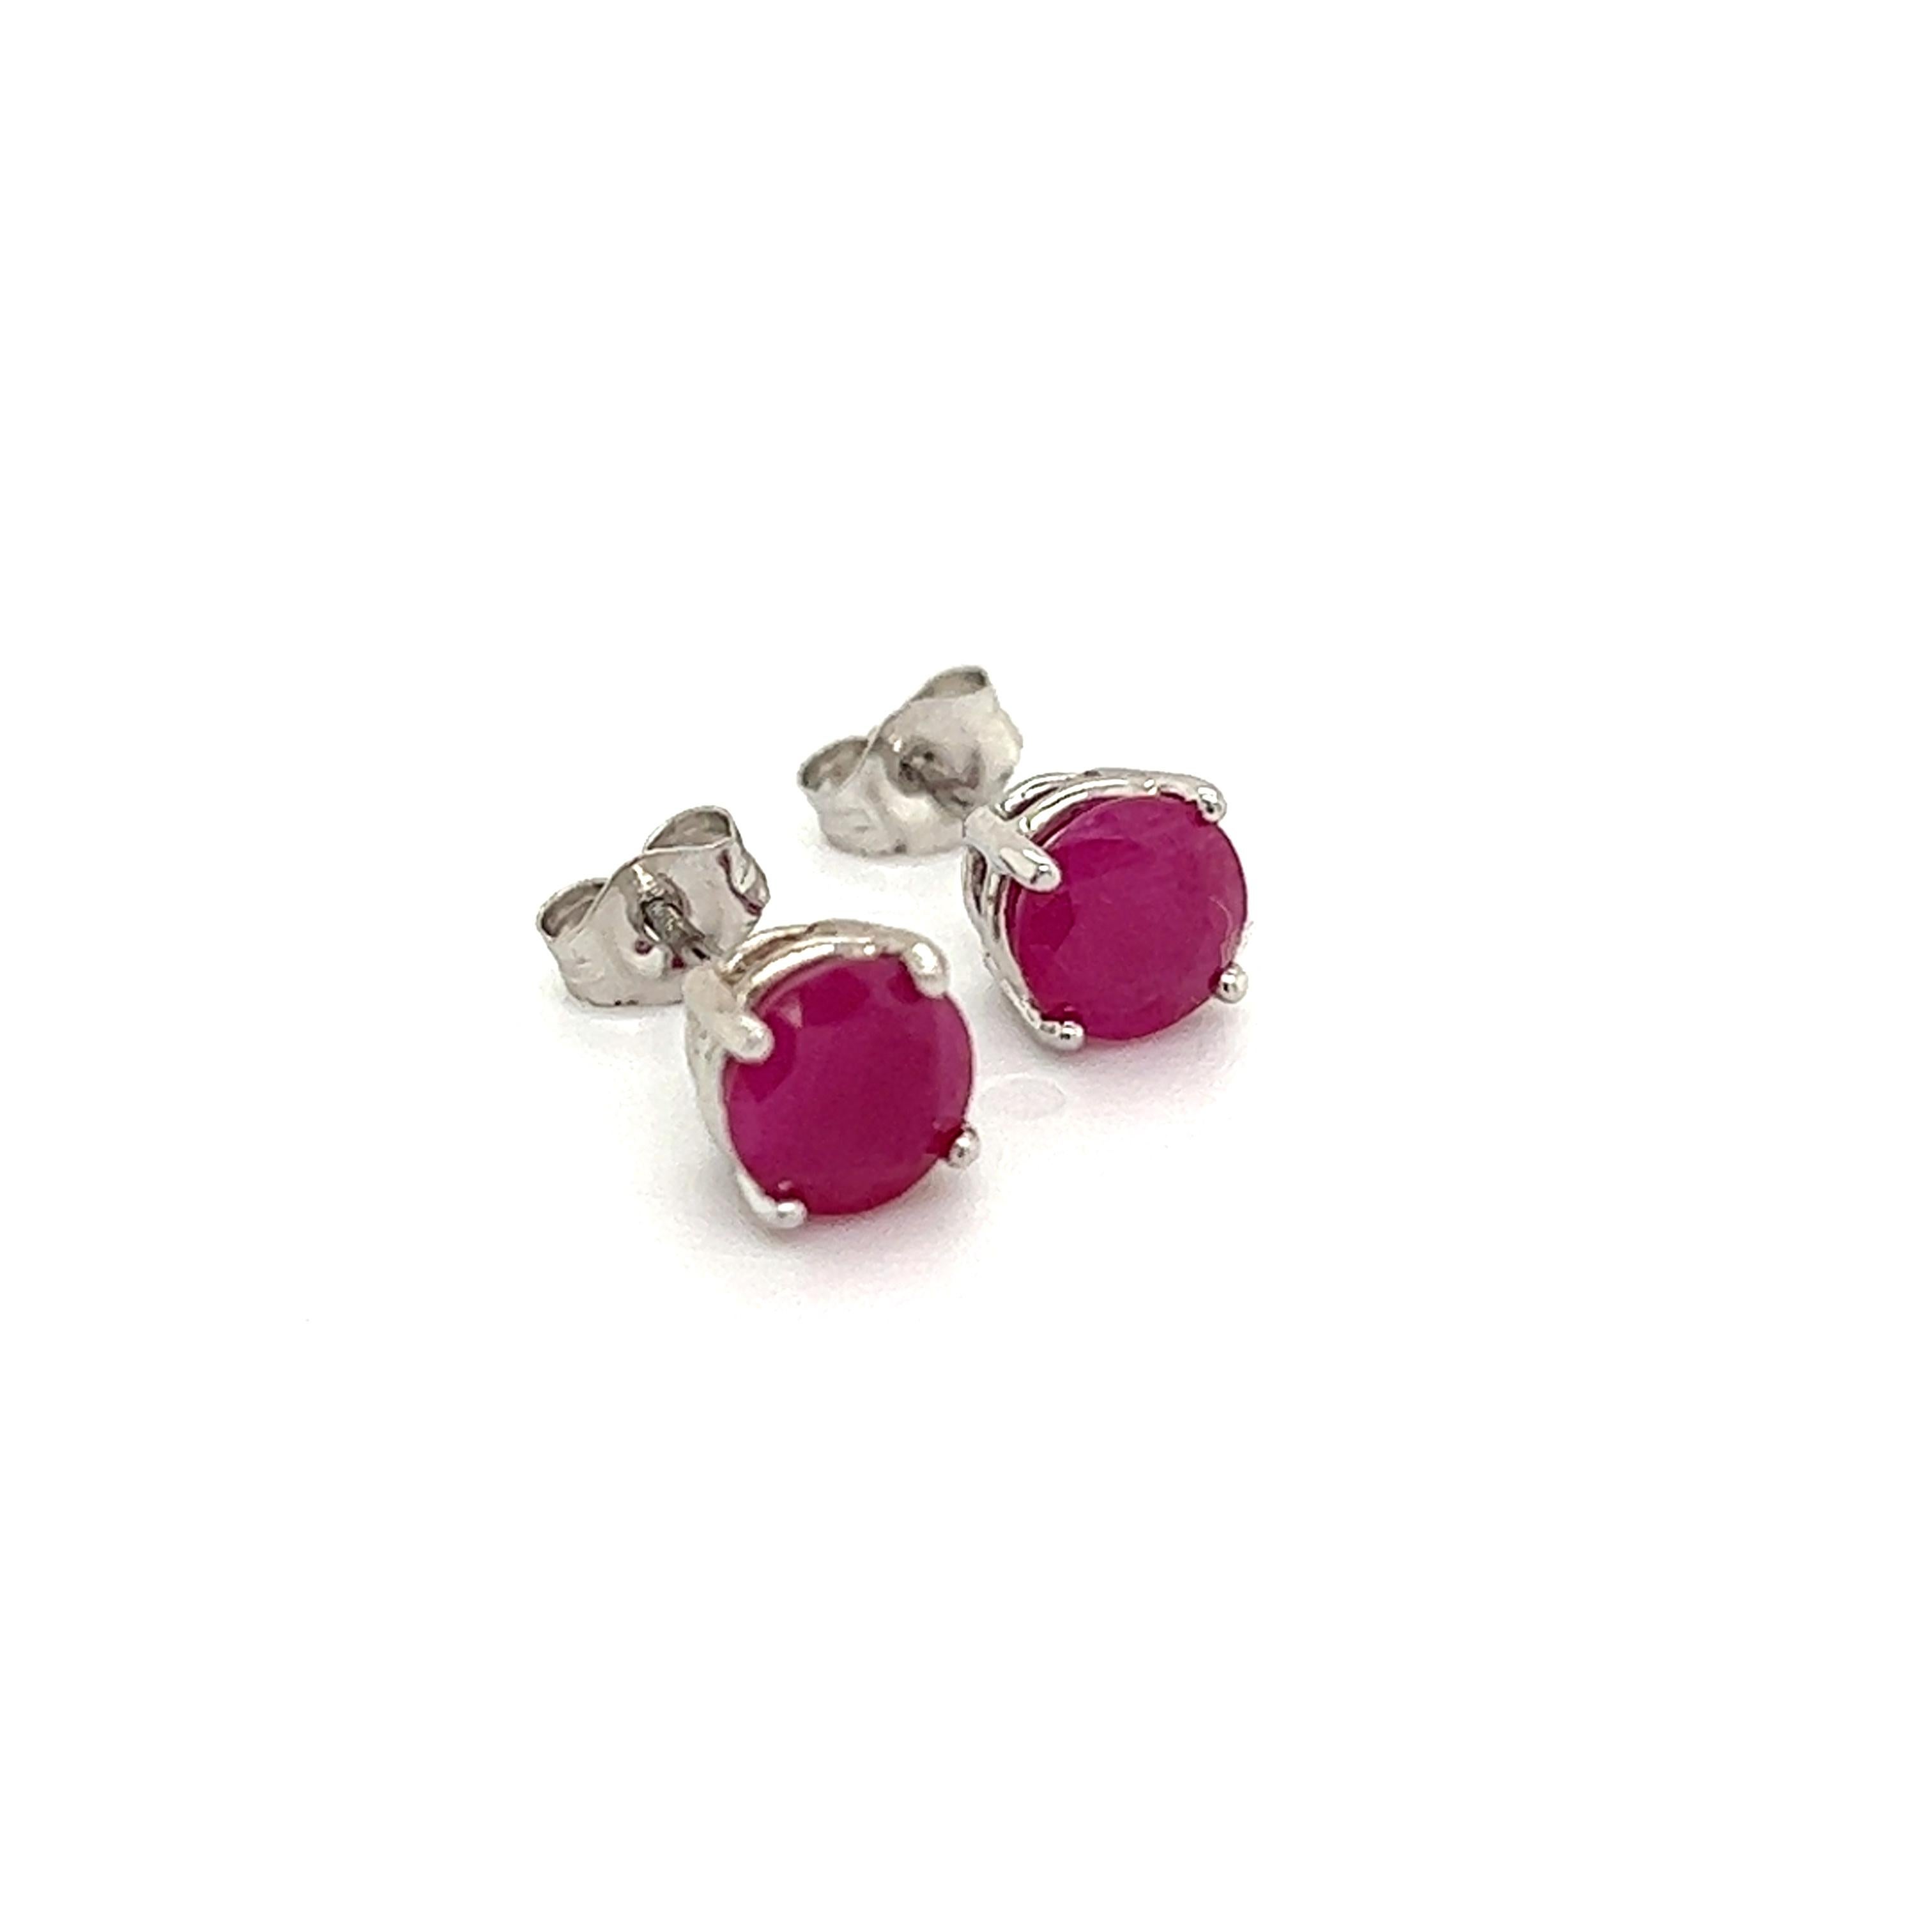 Round Cut Natural Ruby Stud Earrings 14k Gold 1.91 TCW 1.28 Grams Certified For Sale